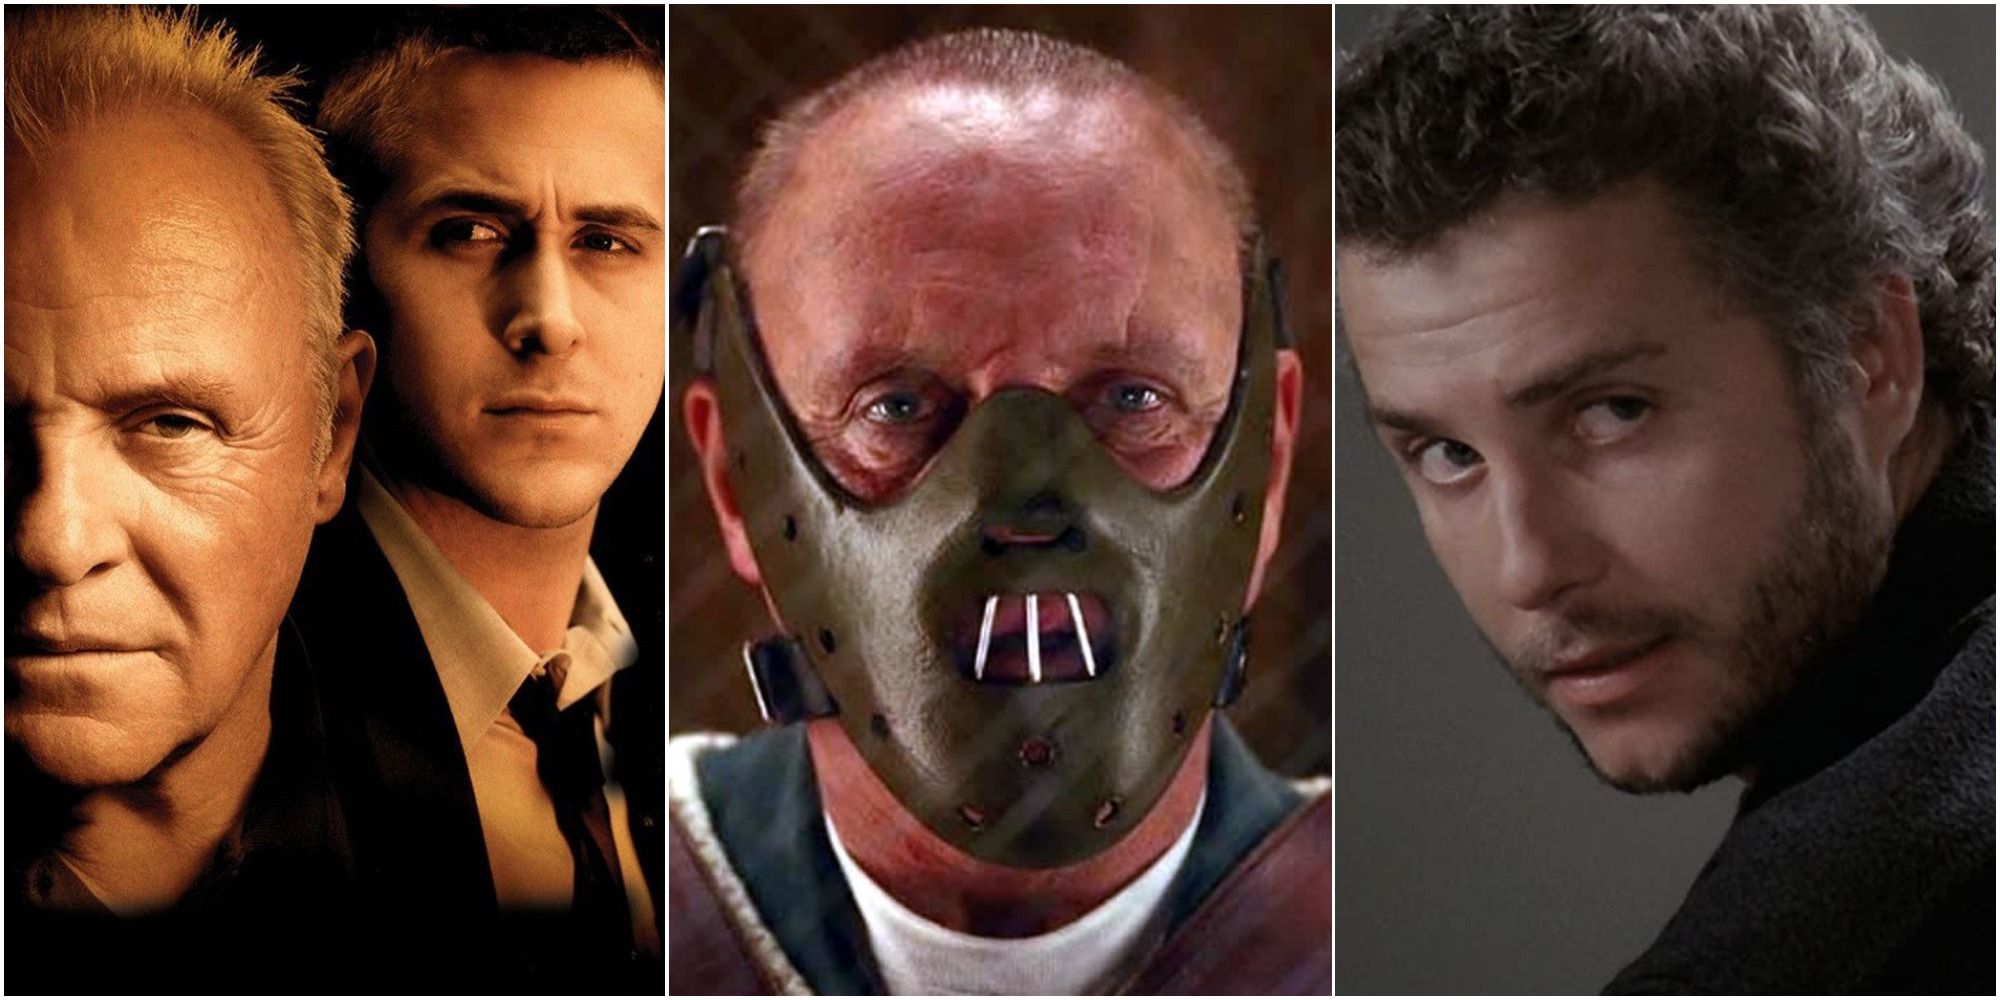 anthony hopkins ryan gosling in fracture, hannibal lecter in red dragon and william petersen in manhunter